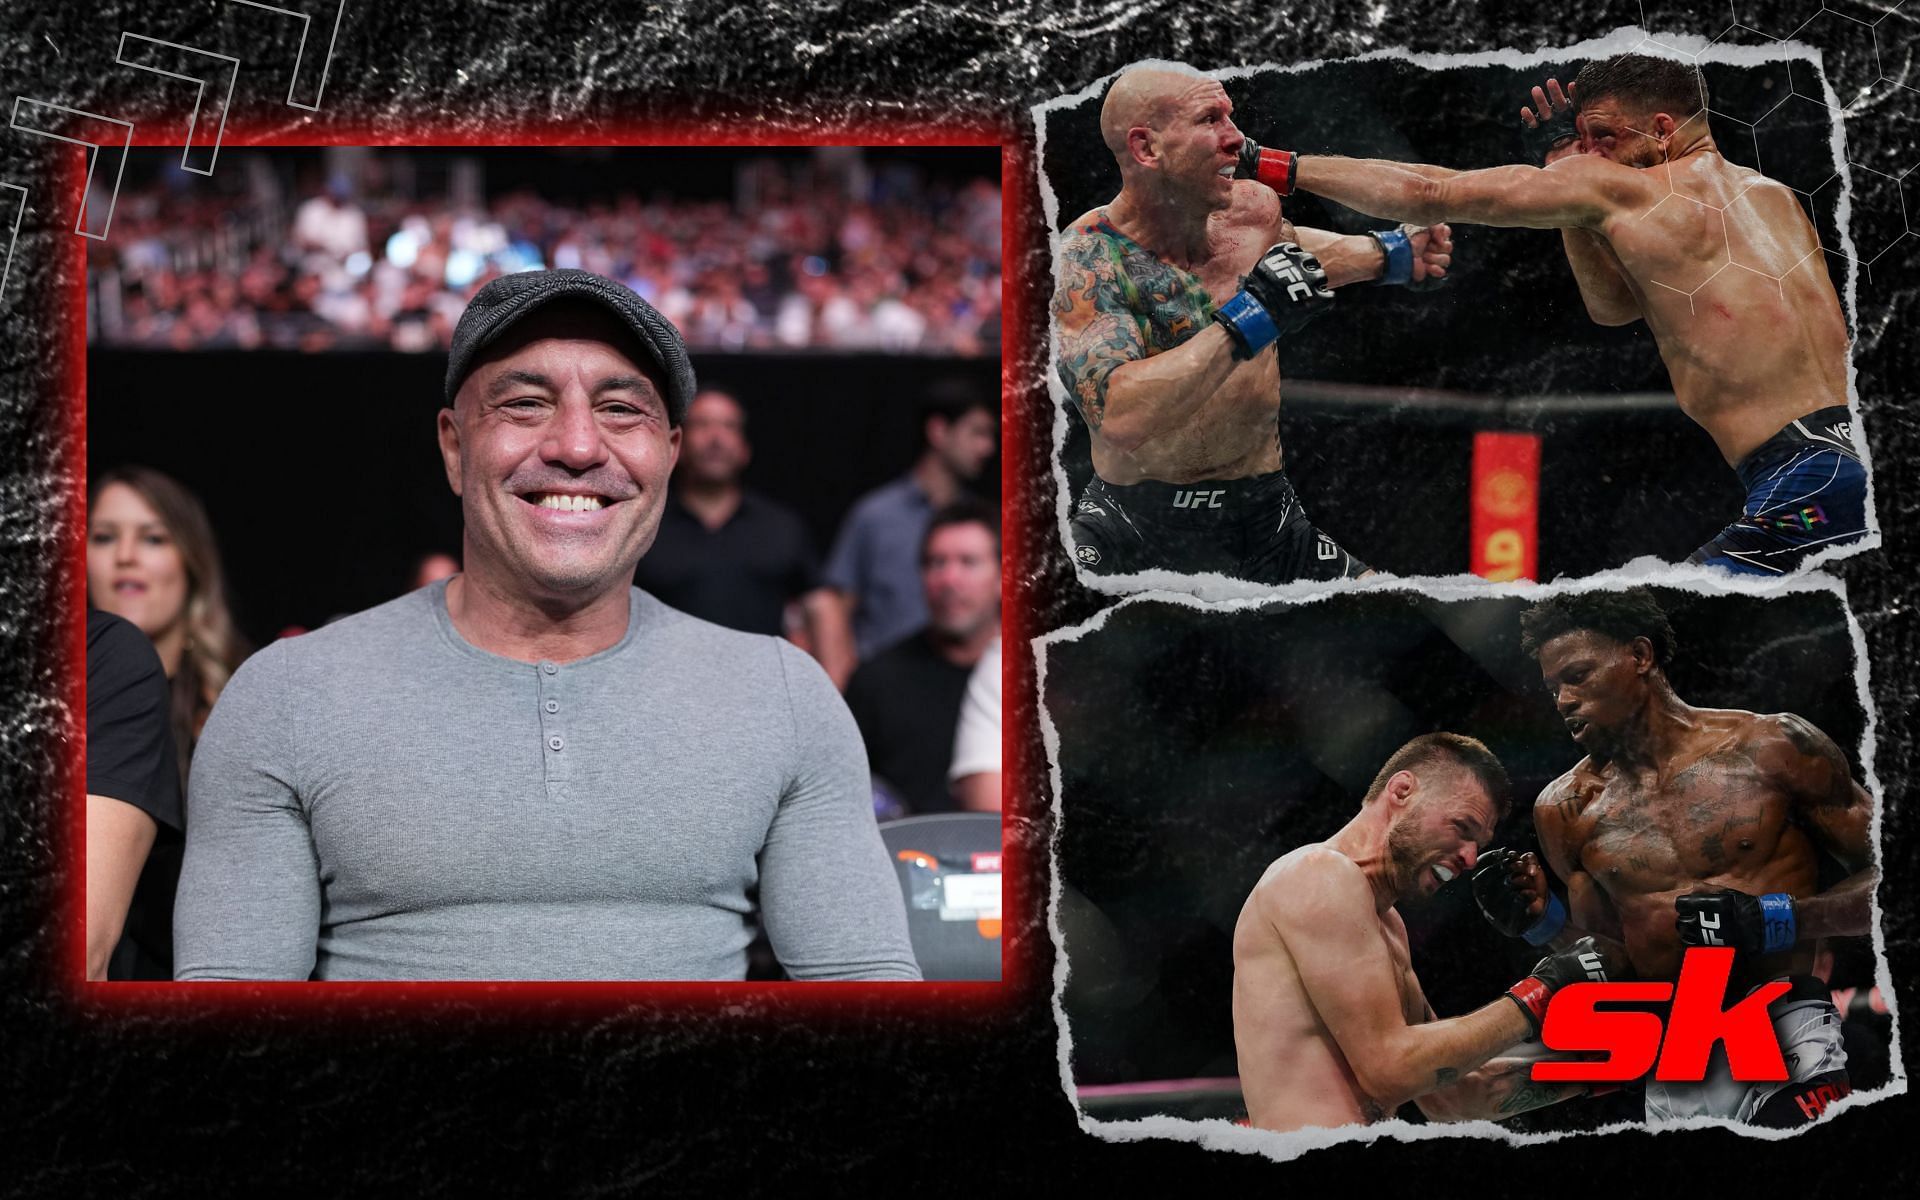 Joe Rogan on his experience of watching a UFC card as an audience member for the first time in over 20 years [image credits: Getty Images]